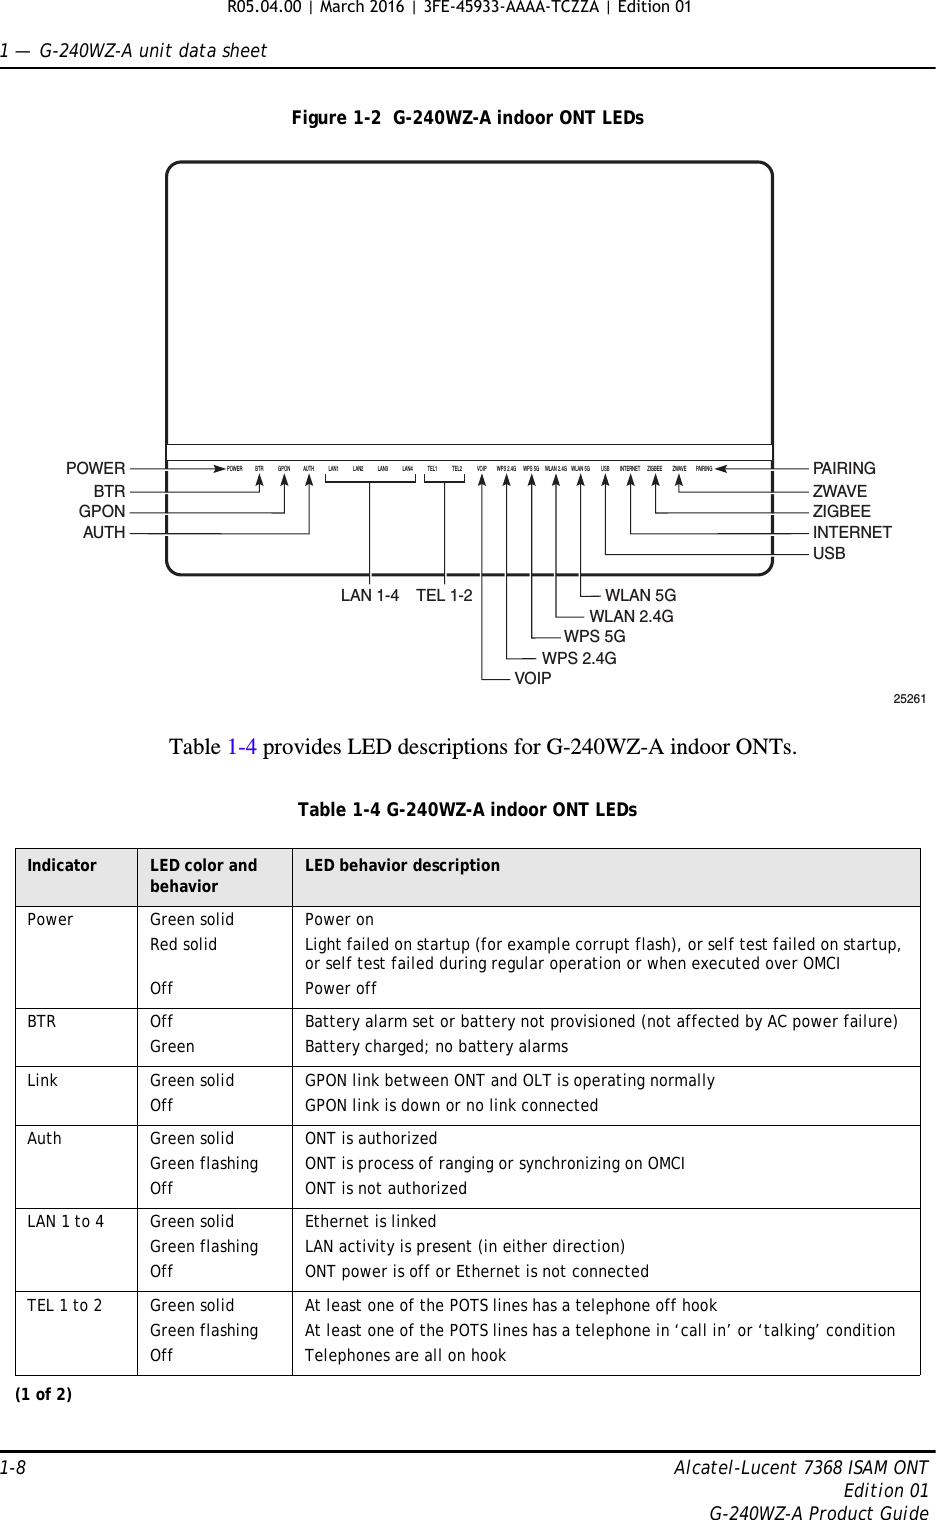 1 —  G-240WZ-A unit data sheet1-8 Alcatel-Lucent 7368 ISAM ONTEdition 01G-240WZ-A Product GuideFigure 1-2  G-240WZ-A indoor ONT LEDsTable 1-4 provides LED descriptions for G-240WZ-A indoor ONTs.Table 1-4 G-240WZ-A indoor ONT LEDsPOWER BTR GPON AUTH LAN1 LAN2 LAN3LAN4 VOIP WPS 2.4G WPS 5G WLAN 2.4G WLAN 5G USB INTERNET ZIGBEE ZWAVE PAIRINGTEL2TEL1TEL 1-2LAN 1-4PA I R I N GZWAVEZIGBEEINTERNETUSBVOIPWLAN 5GWPS 5GWLAN 2.4GWPS 2.4GBTRGPONAUTH25261POWERIndicator LED color and behavior LED behavior descriptionPower Green solidRed solidOffPower onLight failed on startup (for example corrupt flash), or self test failed on startup, or self test failed during regular operation or when executed over OMCIPower offBTR OffGreenBattery alarm set or battery not provisioned (not affected by AC power failure)Battery charged; no battery alarmsLink Green solidOffGPON link between ONT and OLT is operating normallyGPON link is down or no link connectedAuth Green solidGreen flashingOffONT is authorizedONT is process of ranging or synchronizing on OMCIONT is not authorizedLAN 1 to 4 Green solidGreen flashingOffEthernet is linkedLAN activity is present (in either direction)ONT power is off or Ethernet is not connectedTEL 1 to 2 Green solidGreen flashingOffAt least one of the POTS lines has a telephone off hookAt least one of the POTS lines has a telephone in ‘call in’ or ‘talking’ conditionTelephones are all on hook(1 of 2)R05.04.00 | March 2016 | 3FE-45933-AAAA-TCZZA | Edition 01 